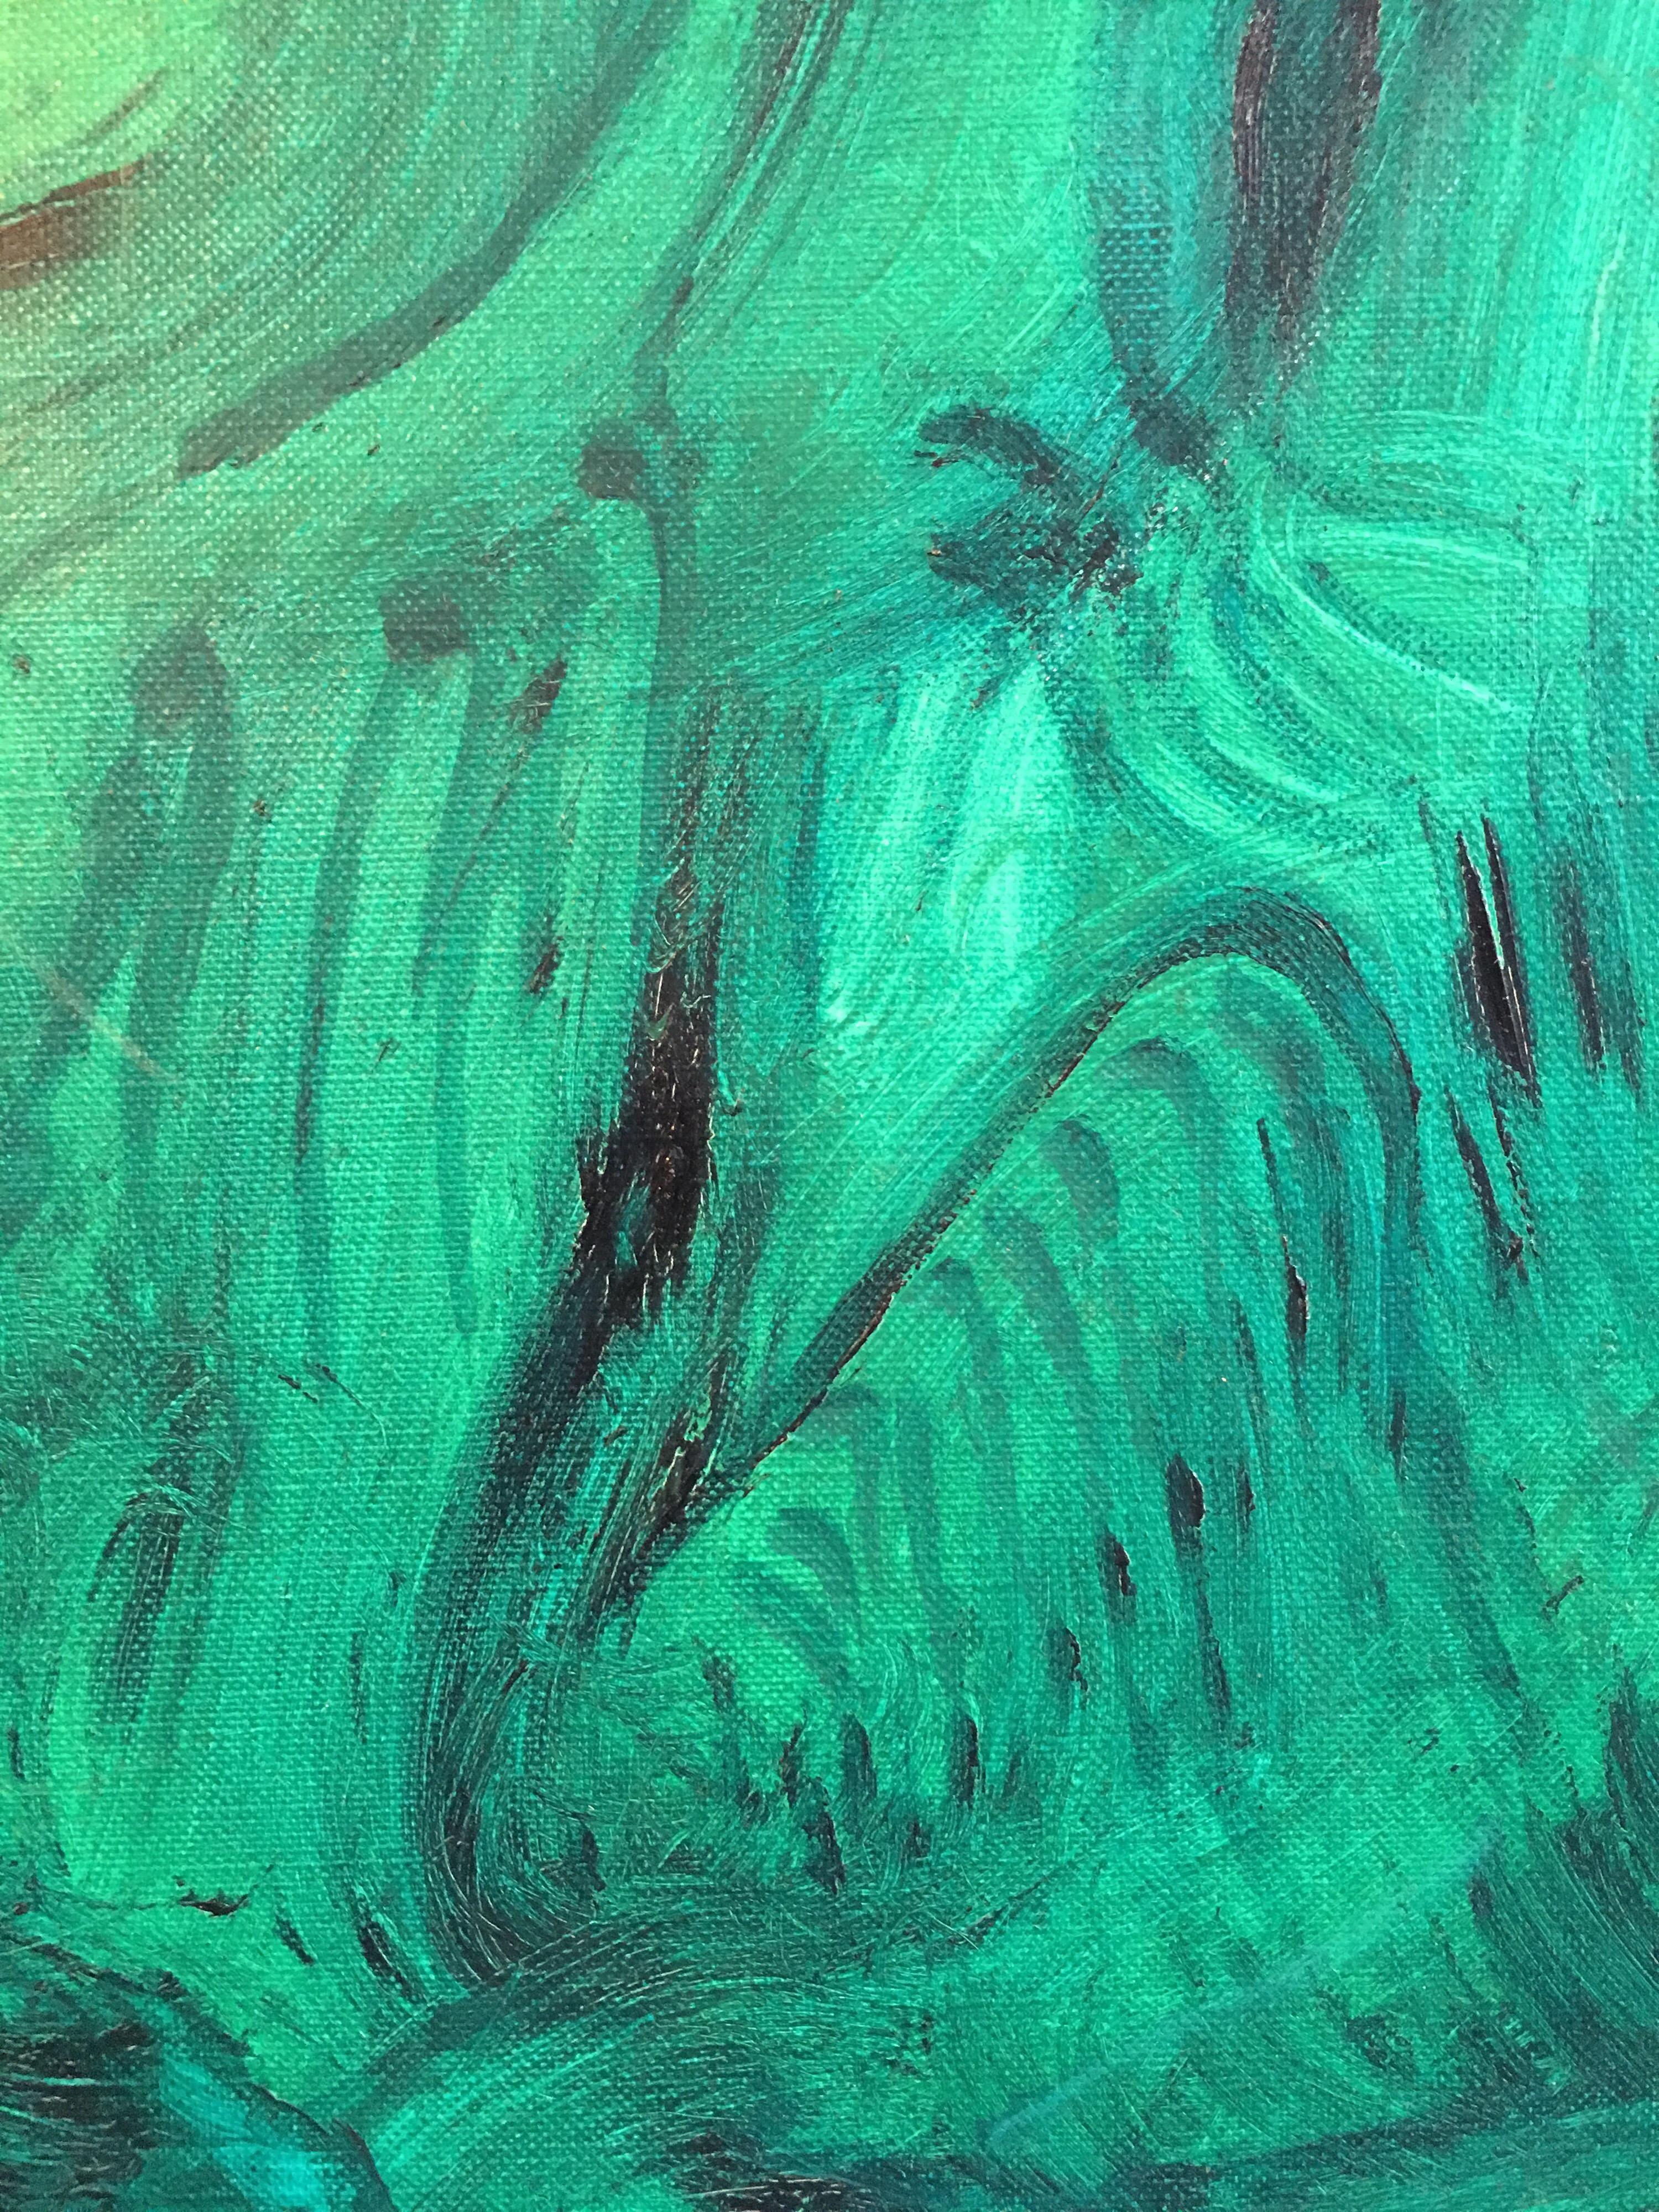 Expressive Abstract, Green Colour, Original Oil Painting, Signed For Sale 2